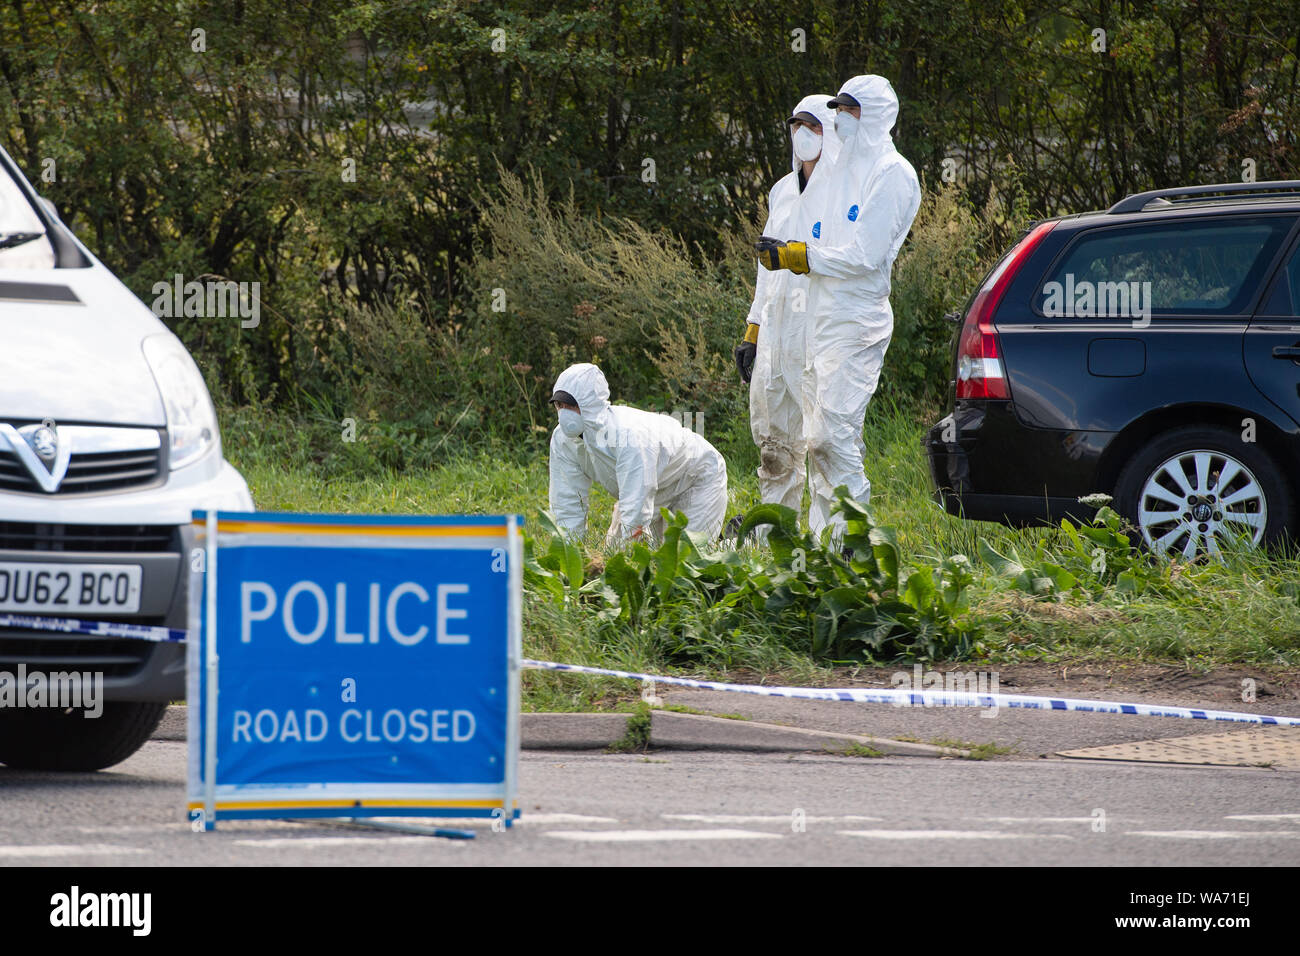 Police officers search near the scene where Thames Valley Police officer Pc Andrew Harper, 28, died following a 'serious incident' at about 11.30pm on Thursday near the A4 Bath Road, between Reading and Newbury, at the village of Sulhamstead in Berkshire. Stock Photo